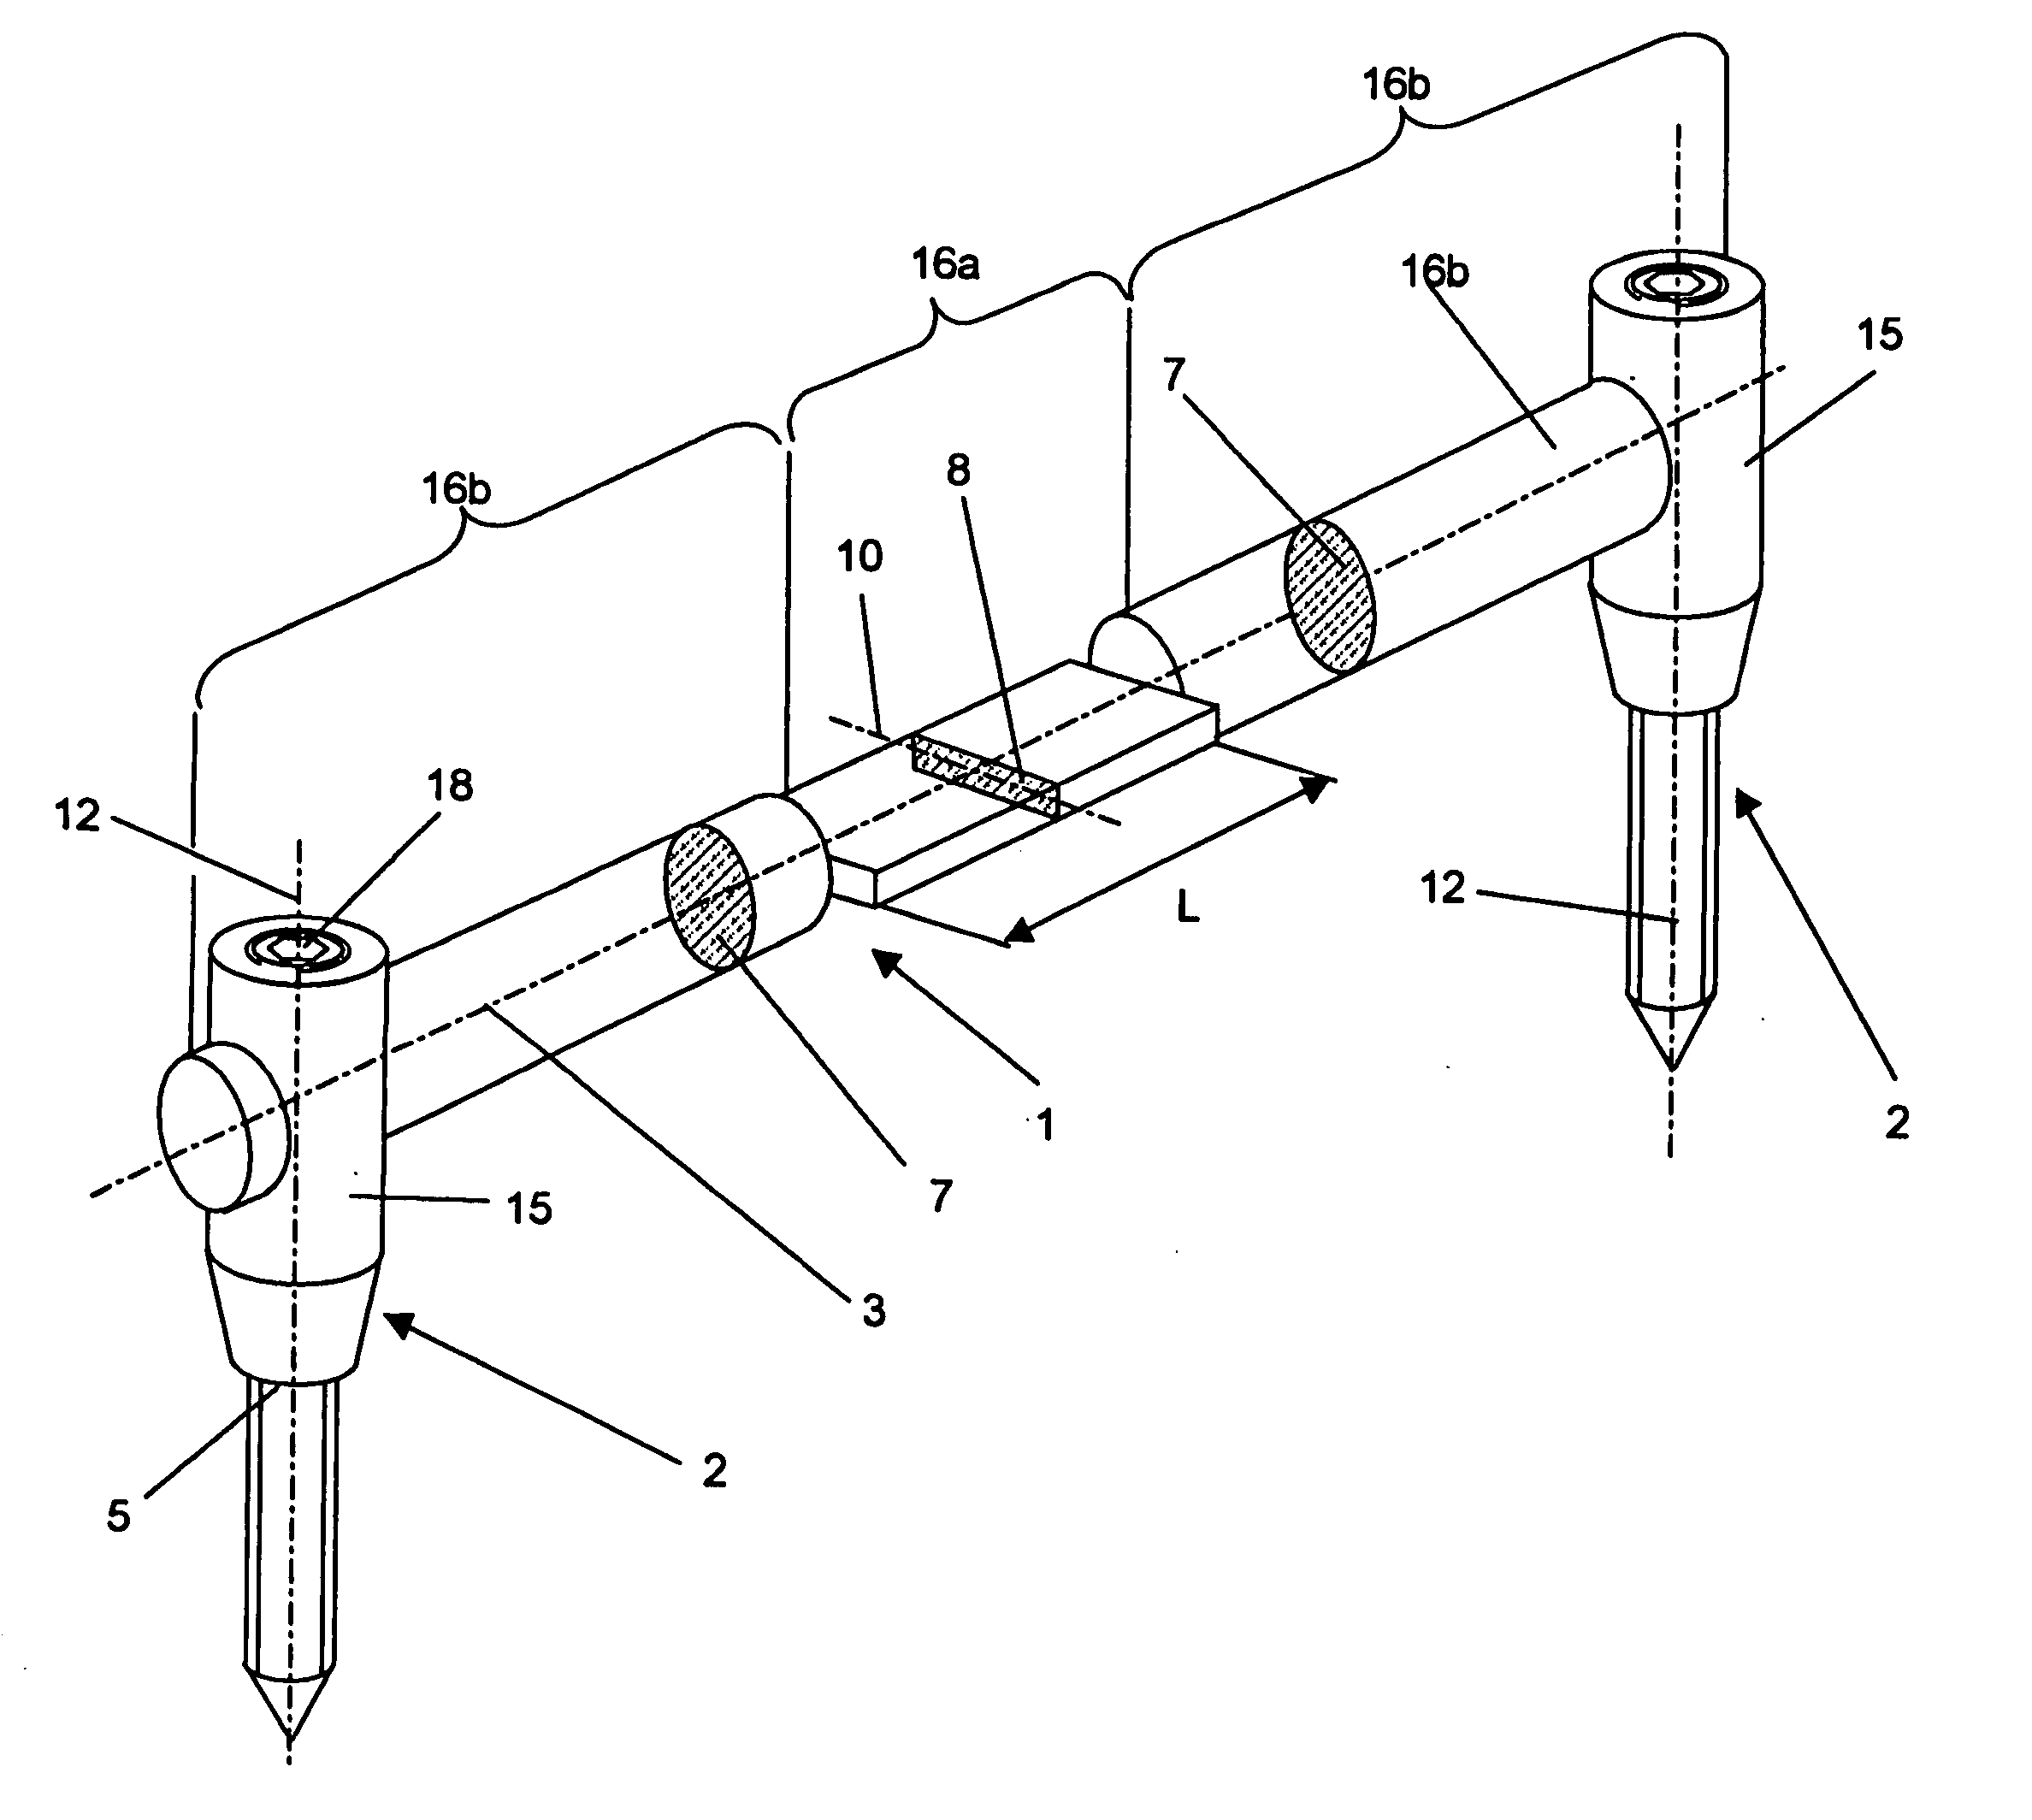 Device for the dynamic stabilization of bones